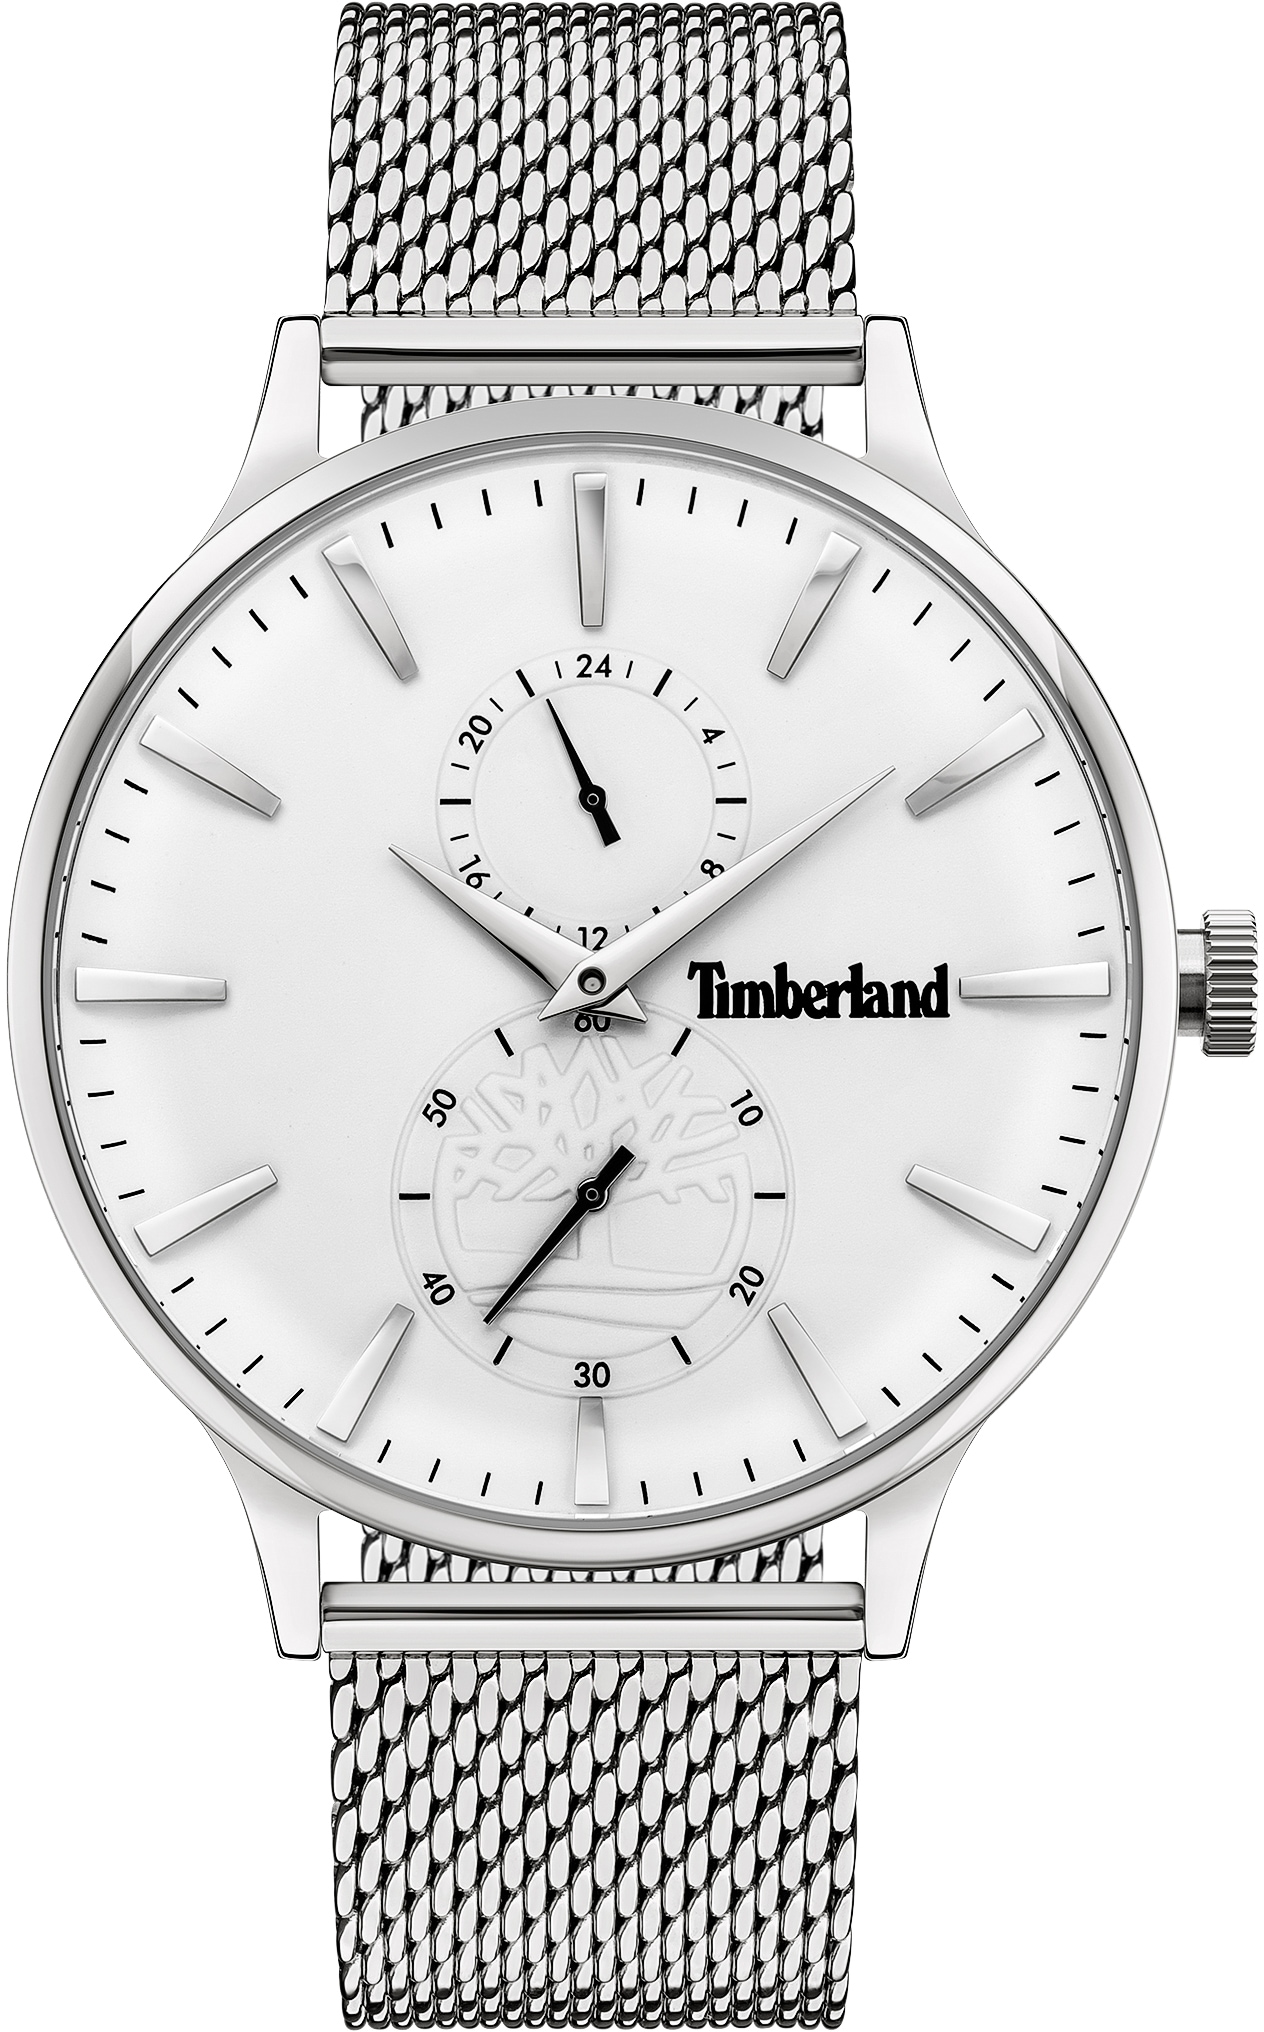 OTTO »EASTMORE, TDWJK2001101« Multifunktionsuhr bei Timberland shoppen online